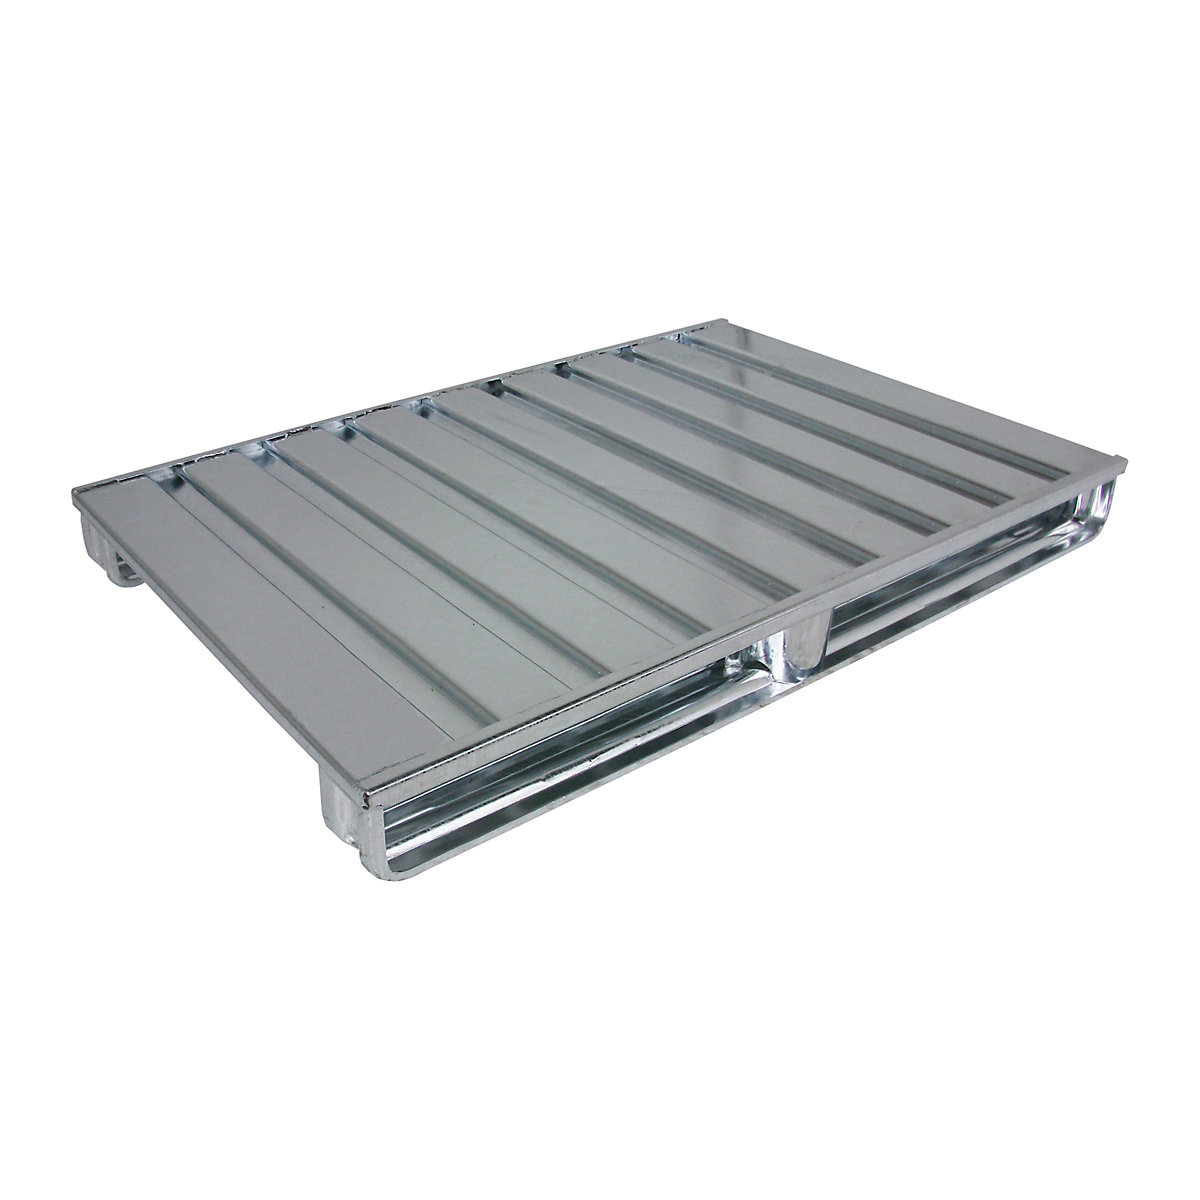 Flat steel pallet – Heson, LxW 1200 x 1000 mm, max. load 1500 kg, zinc plated, 10+ items-3